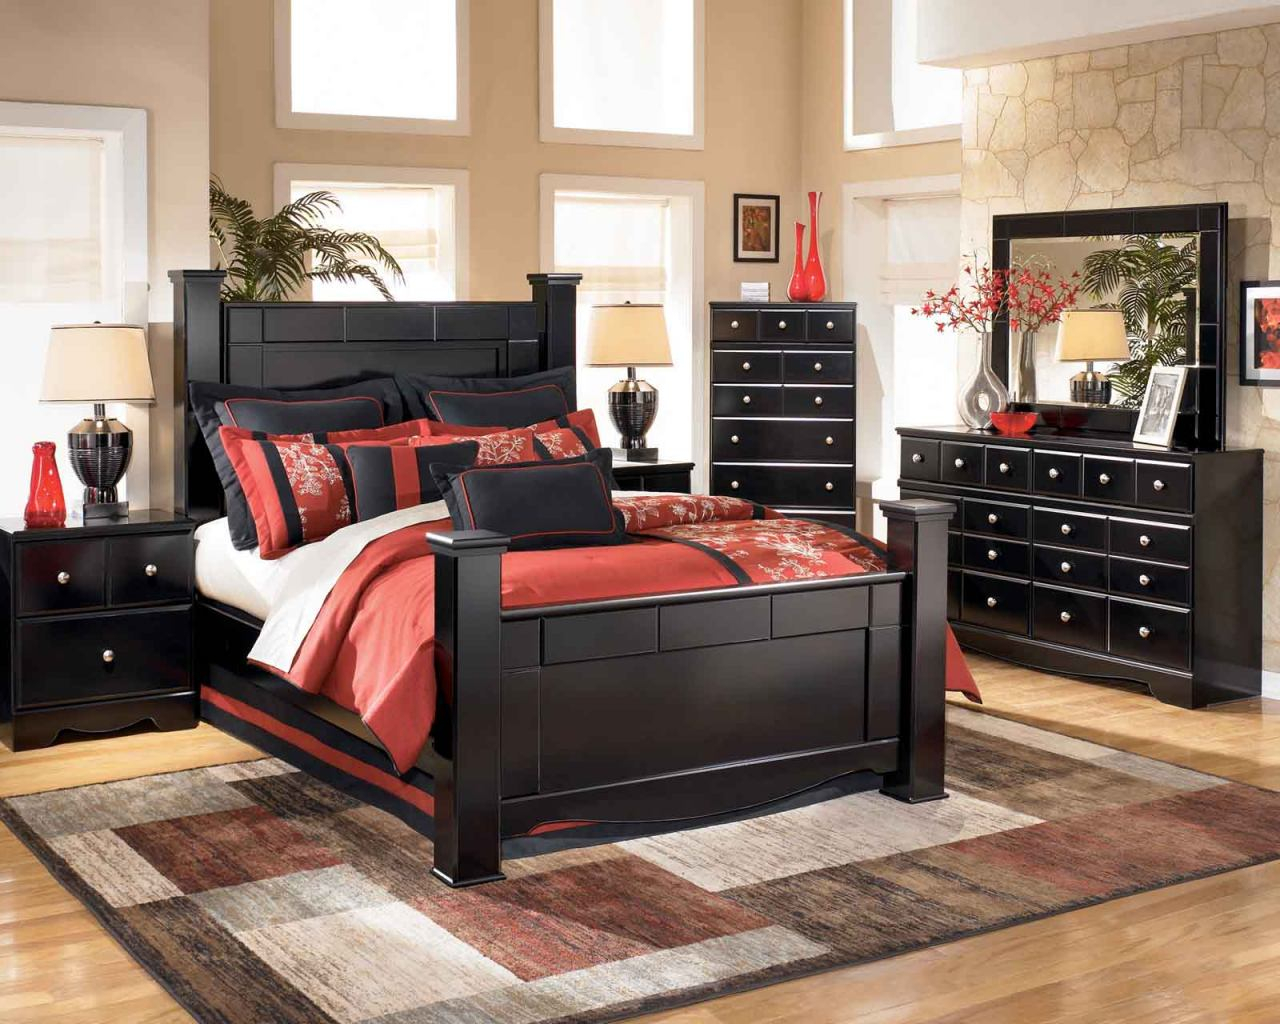 Shay Poster Bedroom Set In Black throughout sizing 1280 X 1024